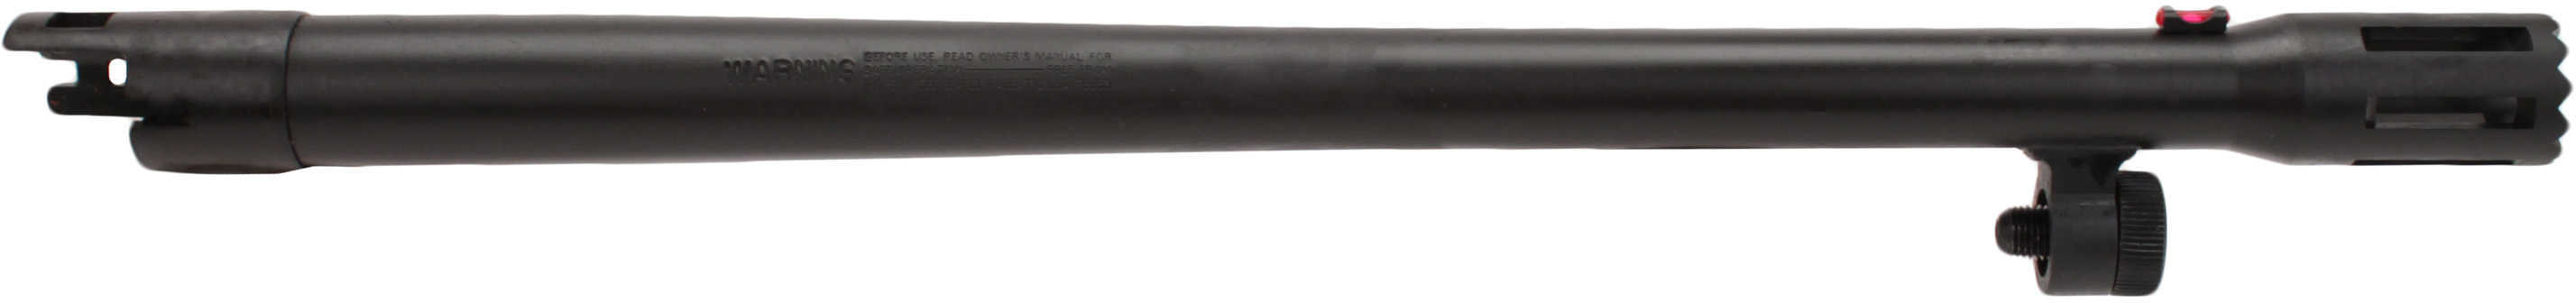 Mossberg 500 Security Barrel 12 ga. 18.5 in. Stand-img-1